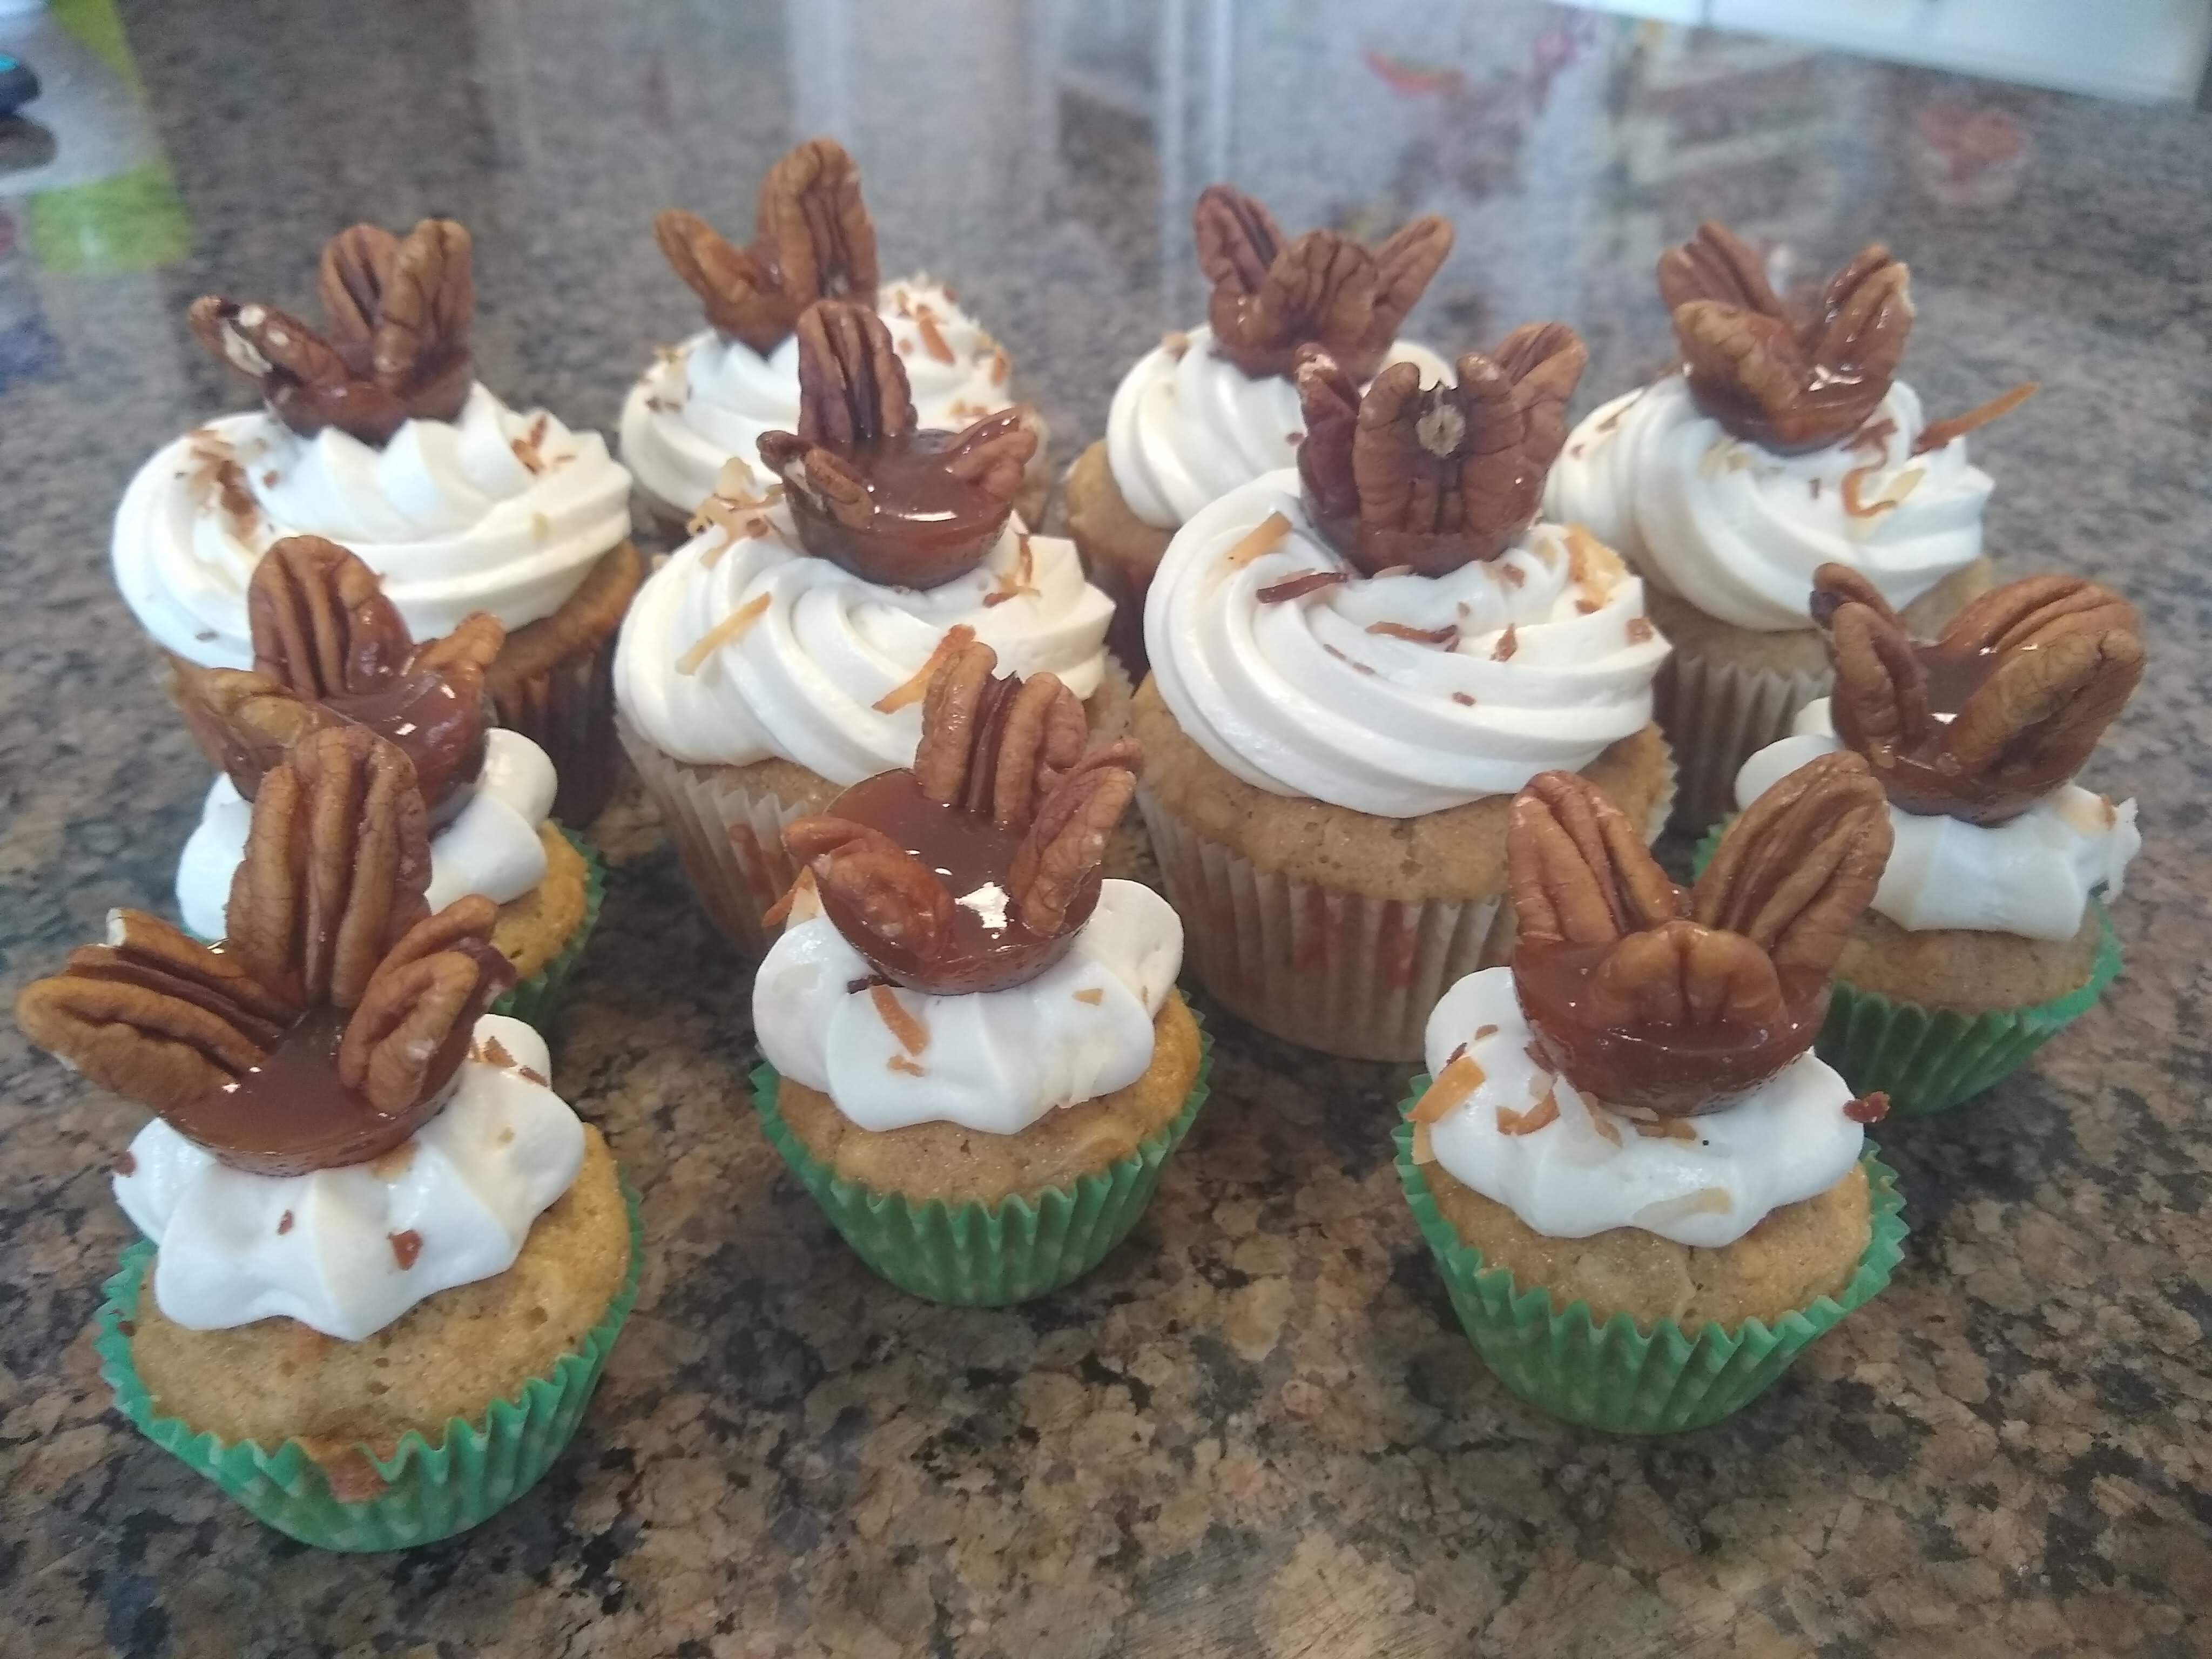 Hummingbird Cupcakes with Cream Cheese-Maple Frosting and Praline Topper